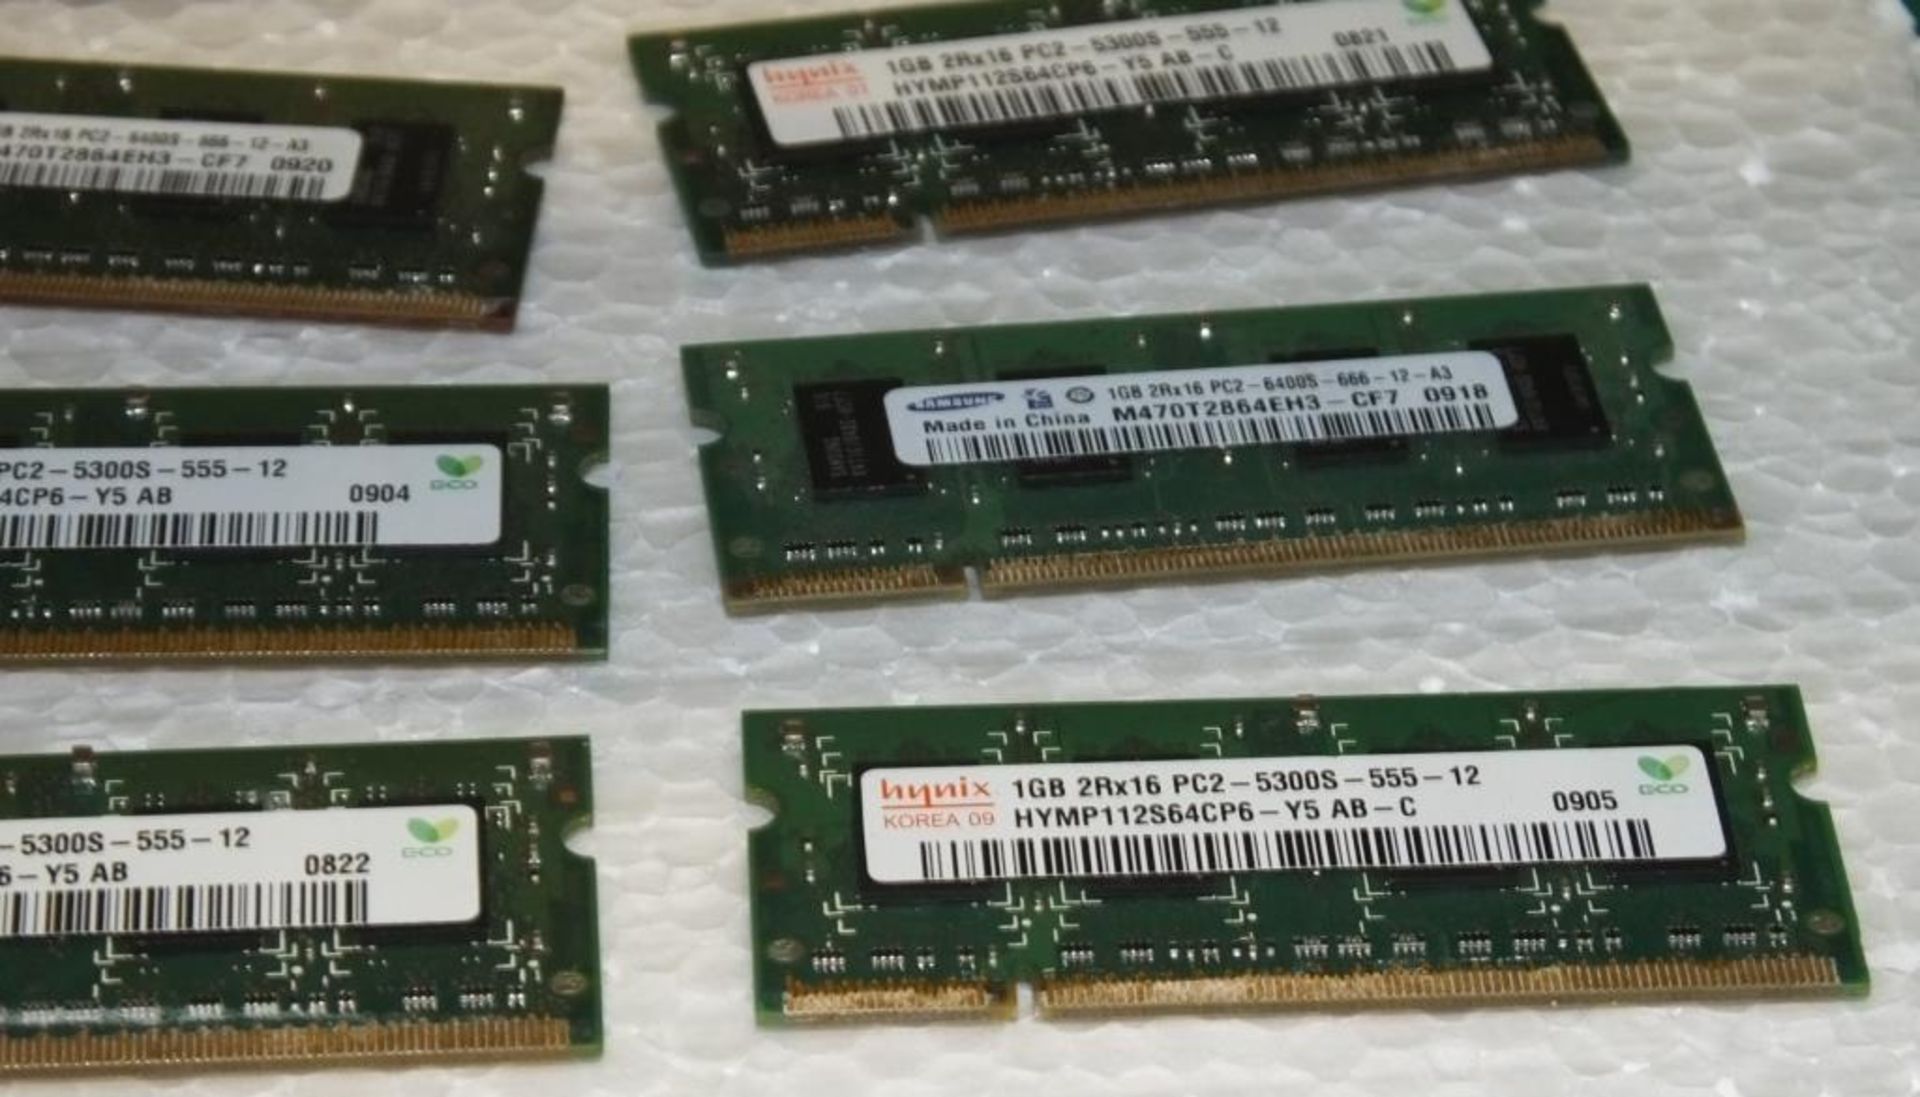 10x 1GB 2Rx 16 PC-2 - 6400S - 666 - 12 - A3 - Image 2 of 2